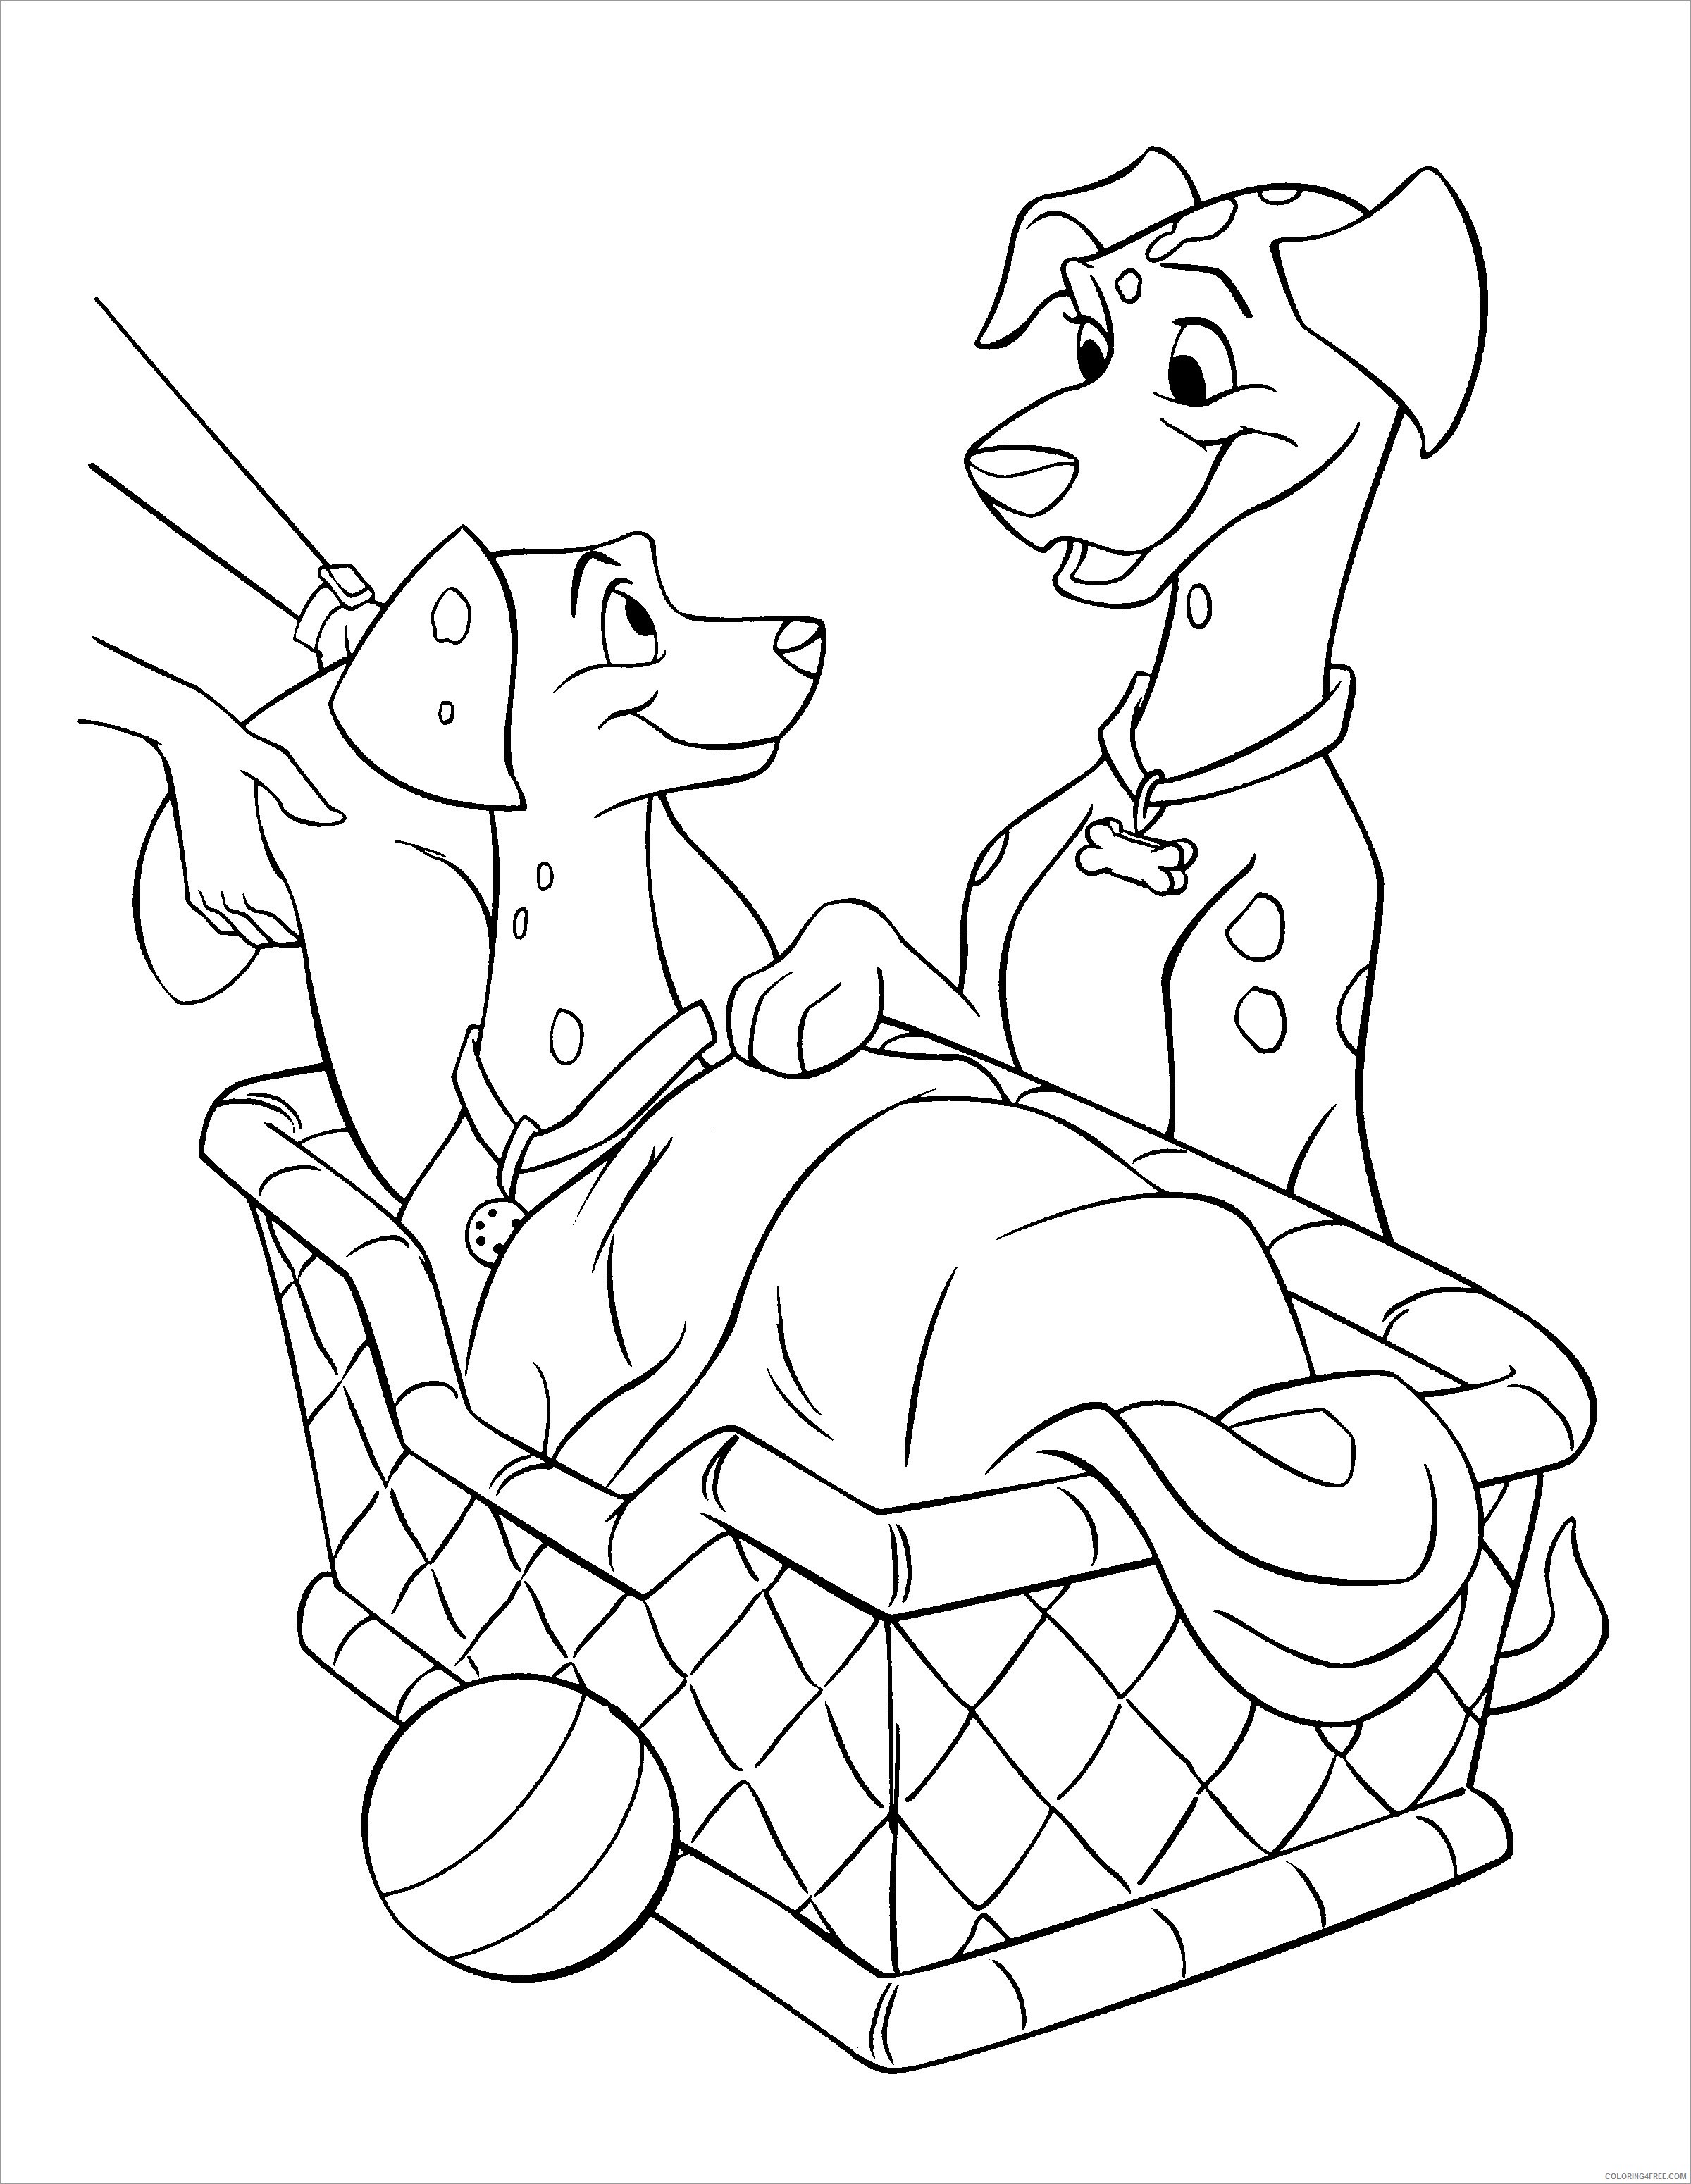 101 Dalmatians Coloring Pages Cartoons 101 dalmatians for kids unsmushed Printable 2020 31 Coloring4free